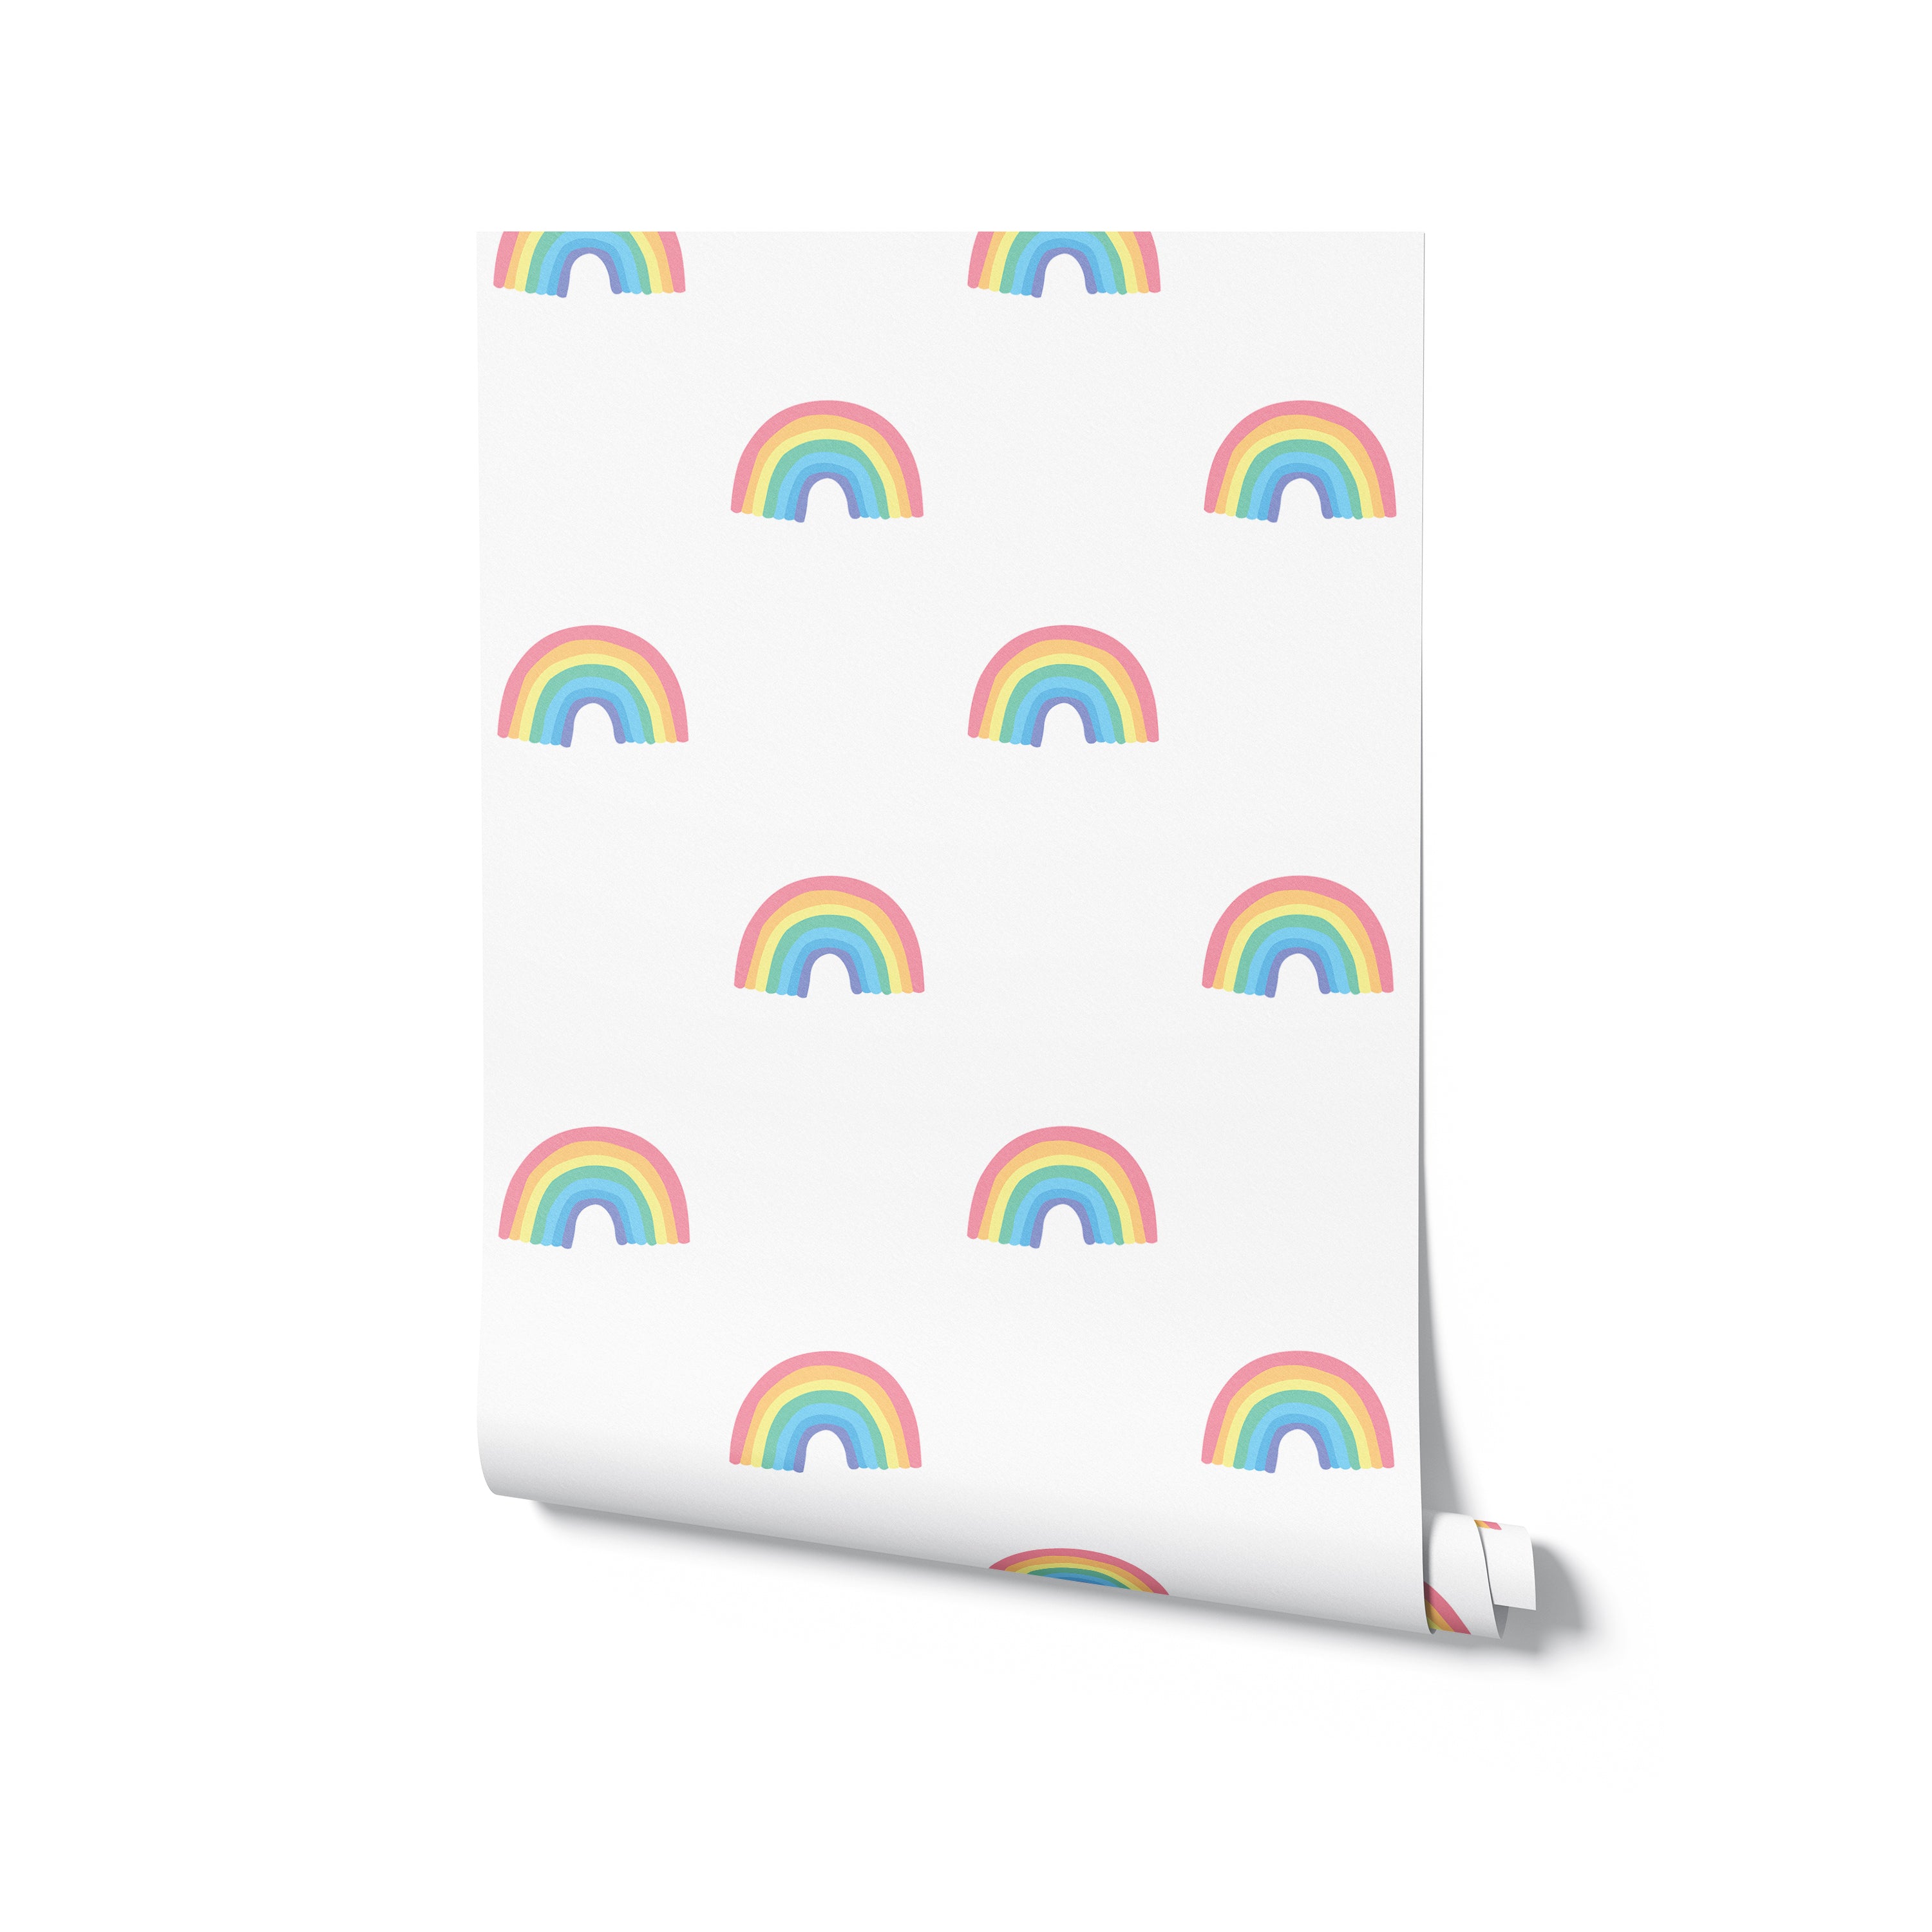 Roll of Chasing Rainbows wallpaper displaying an array of multicolored rainbows on a white background, ideal for brightening up children's rooms or creative spaces